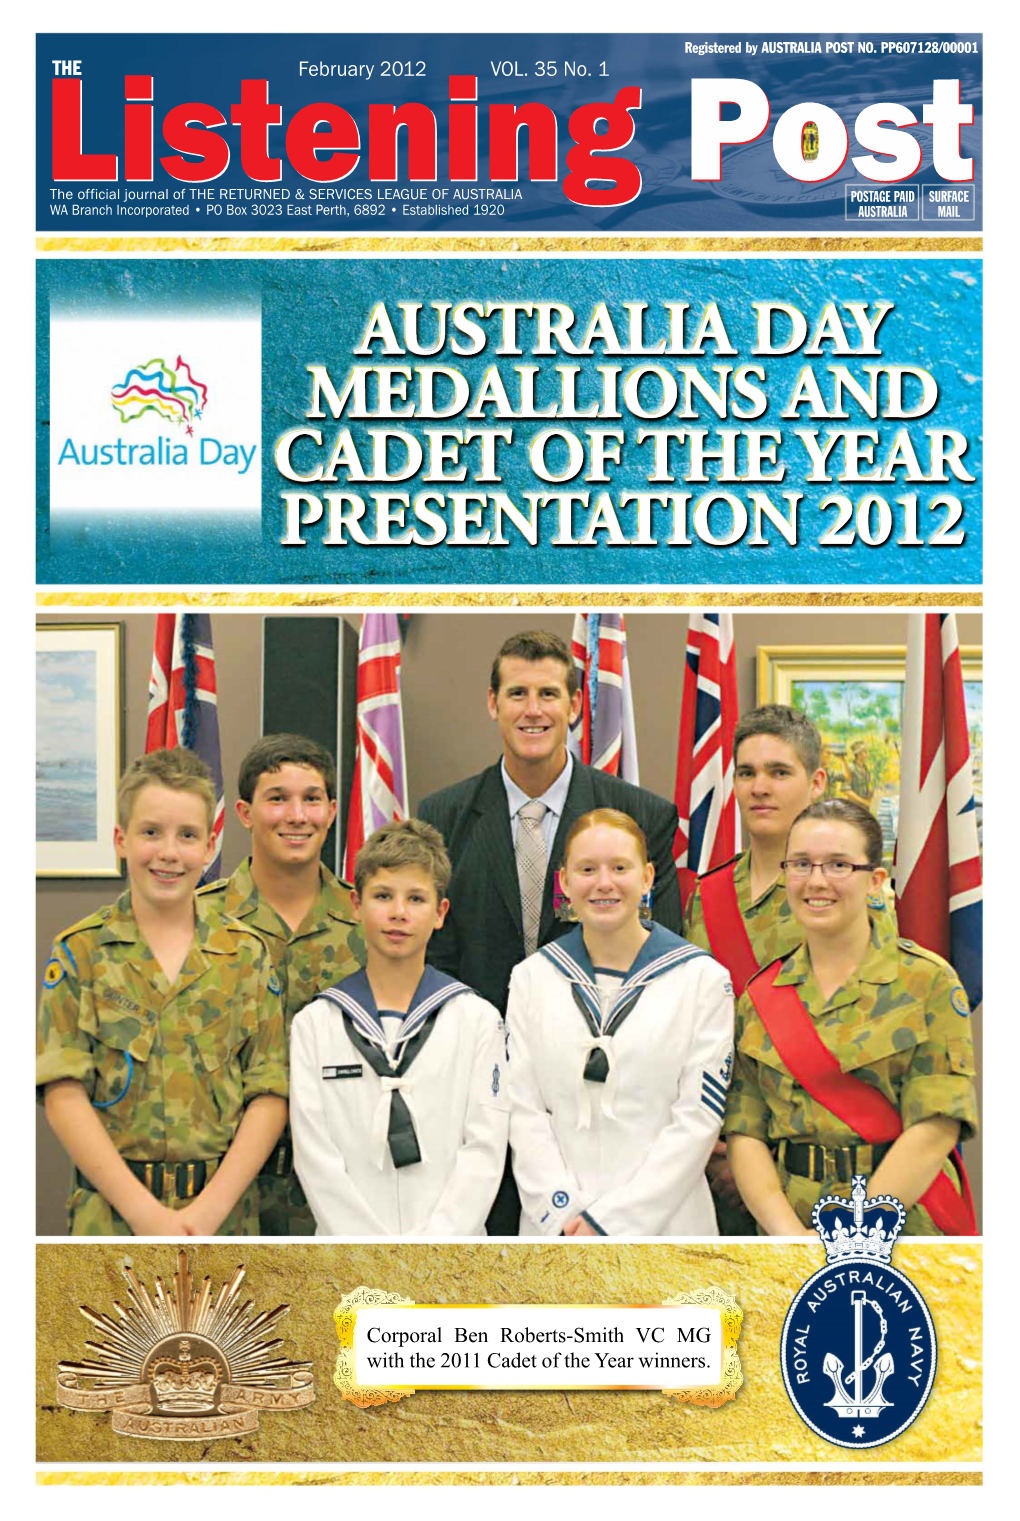 Australia Day Medallions and Cadet of the Year Presentation 2012